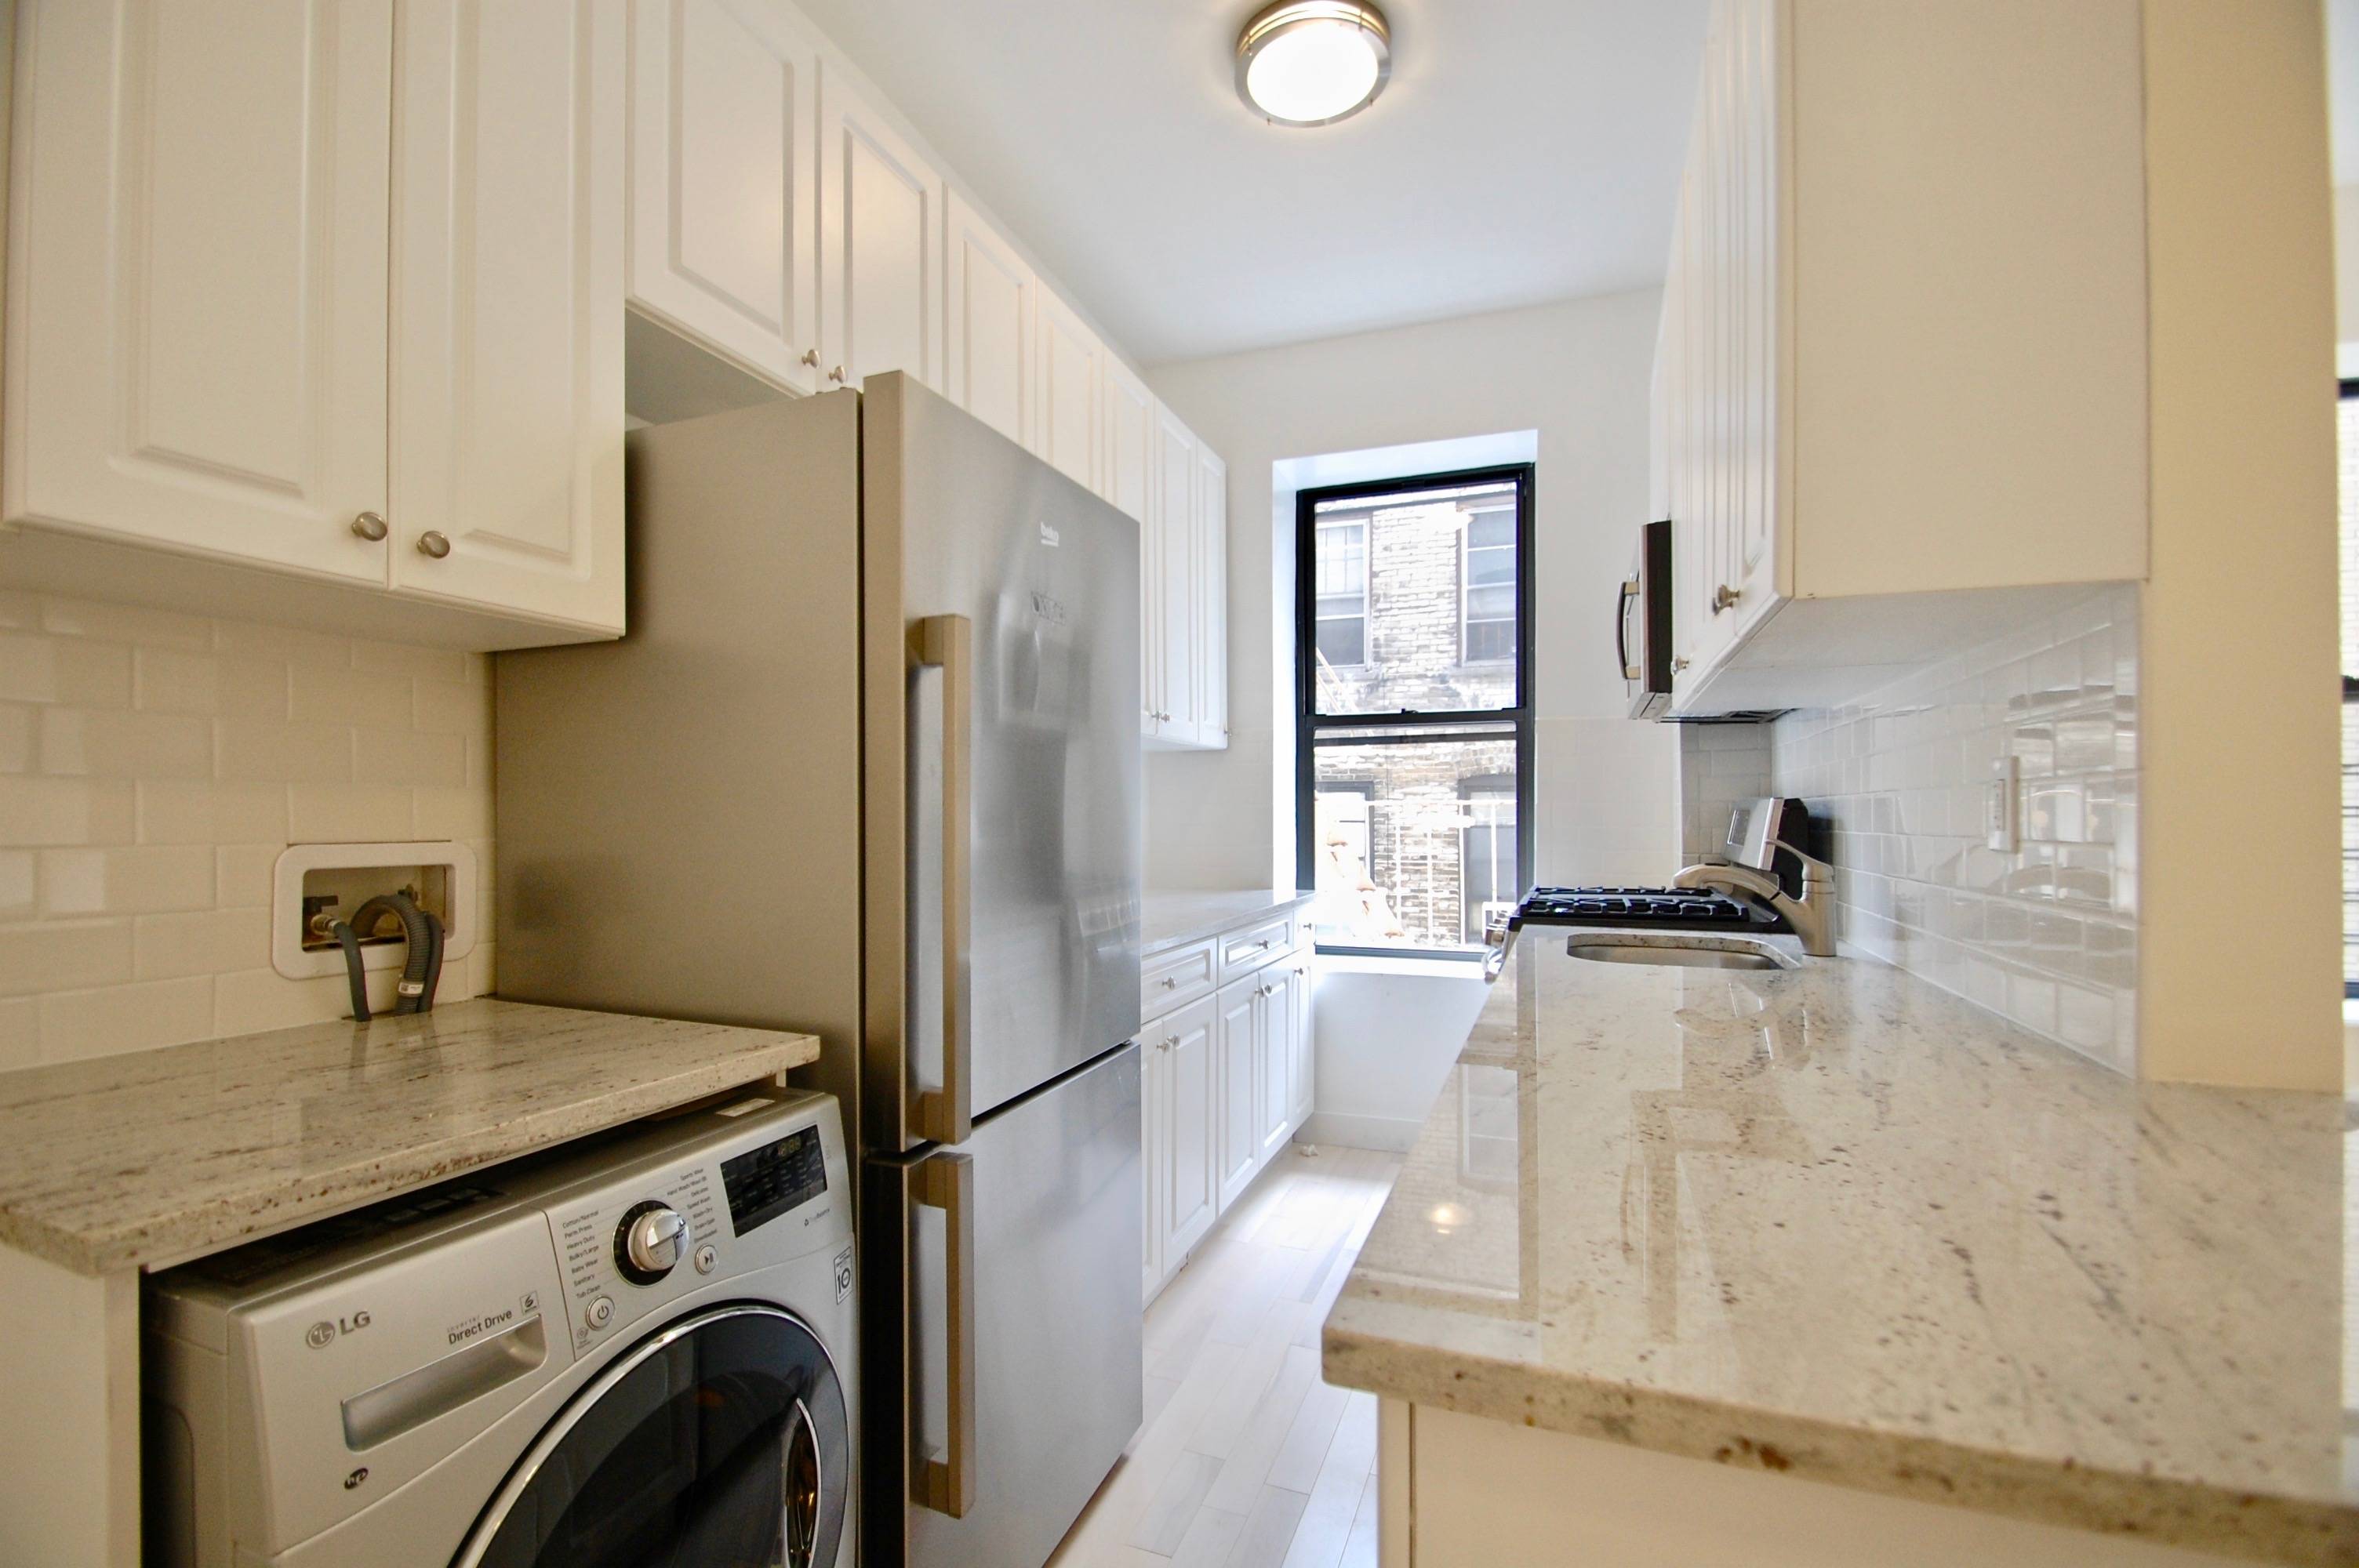 This HUGE Duplex sits in a majestic prewar building atop the historic Cabrini Steps just off of 181st street.